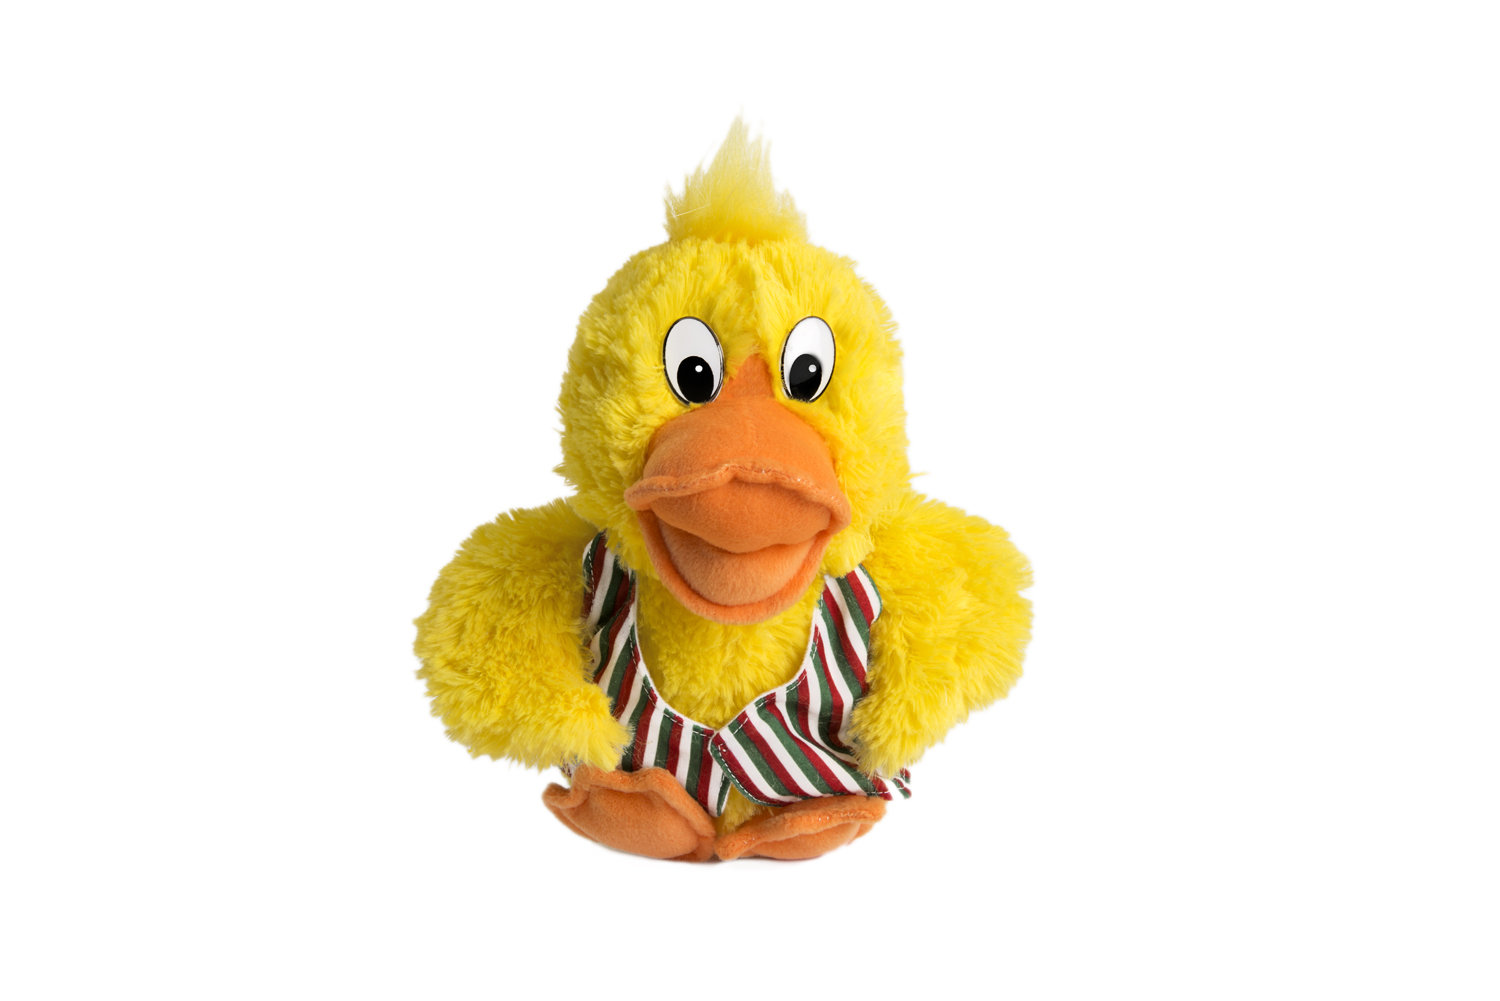 Buy one Disco Duck soft toy and receive another half price! Price is for 2 disco duck soft toys.